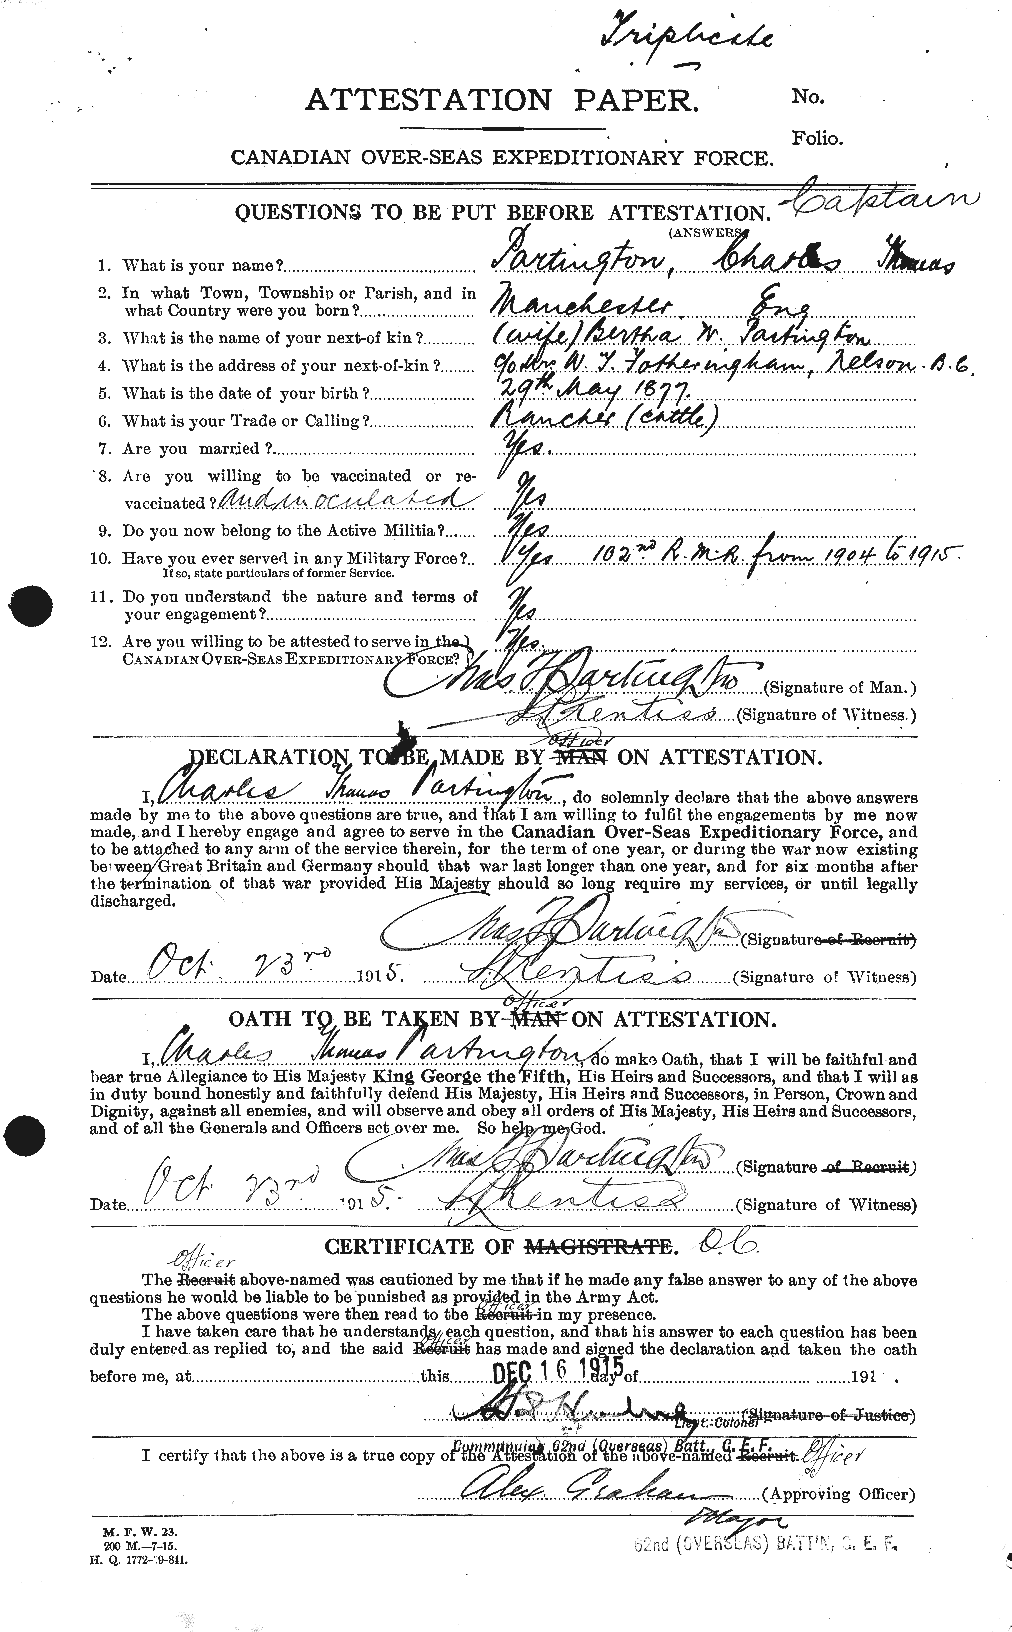 Personnel Records of the First World War - CEF 567060a